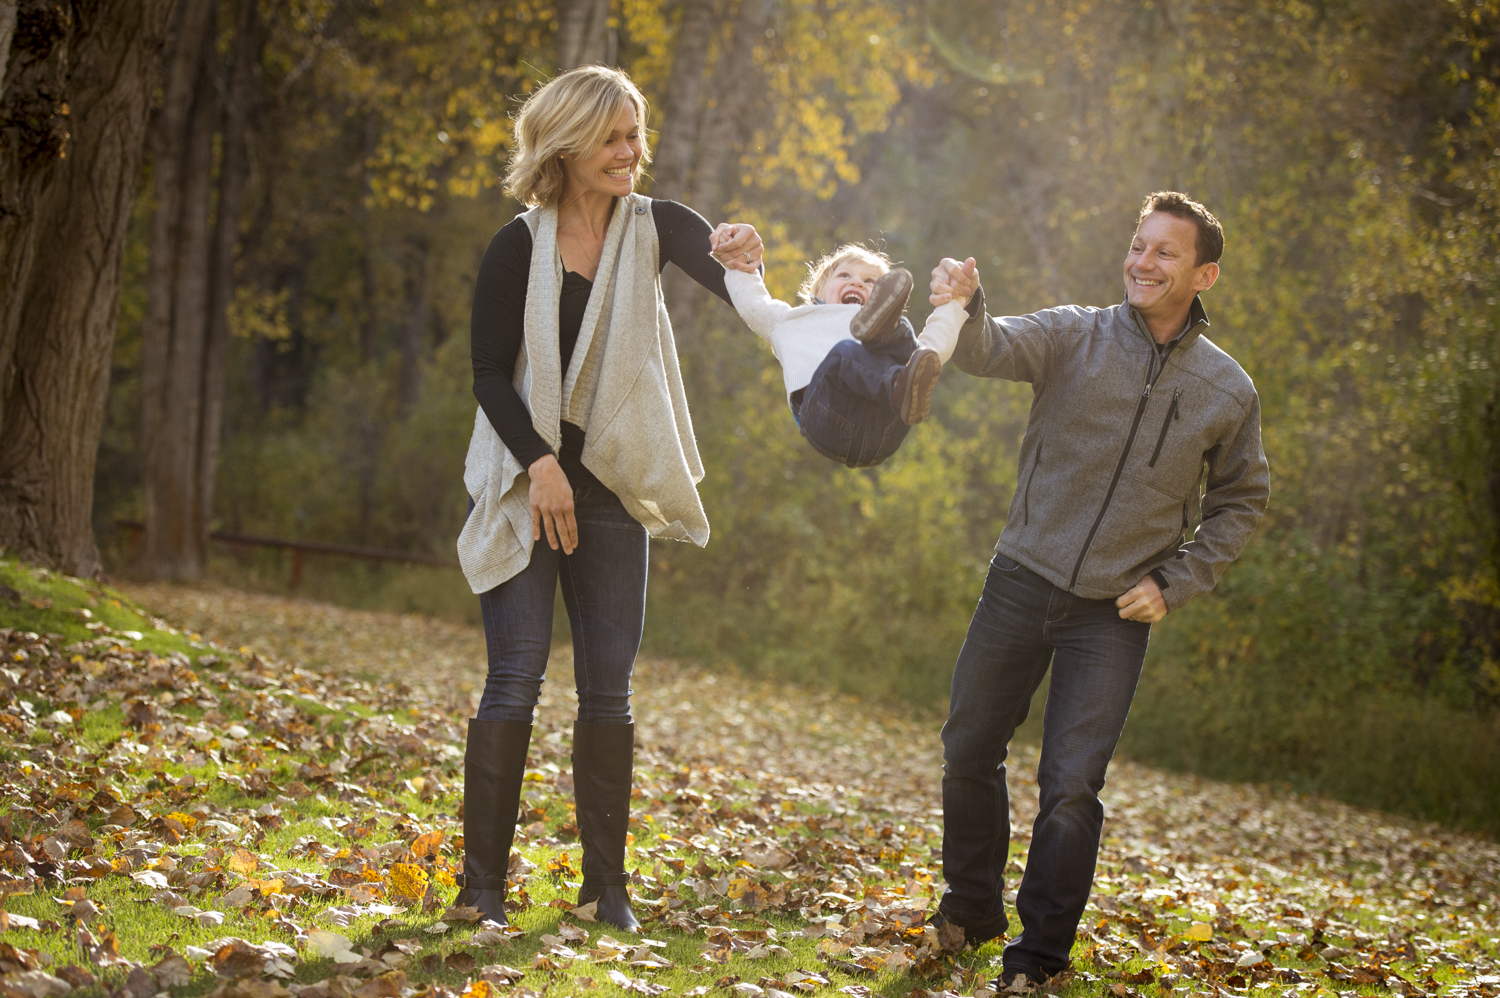 fall_lifestyle_family_leaves_candid_playing-010.jpg